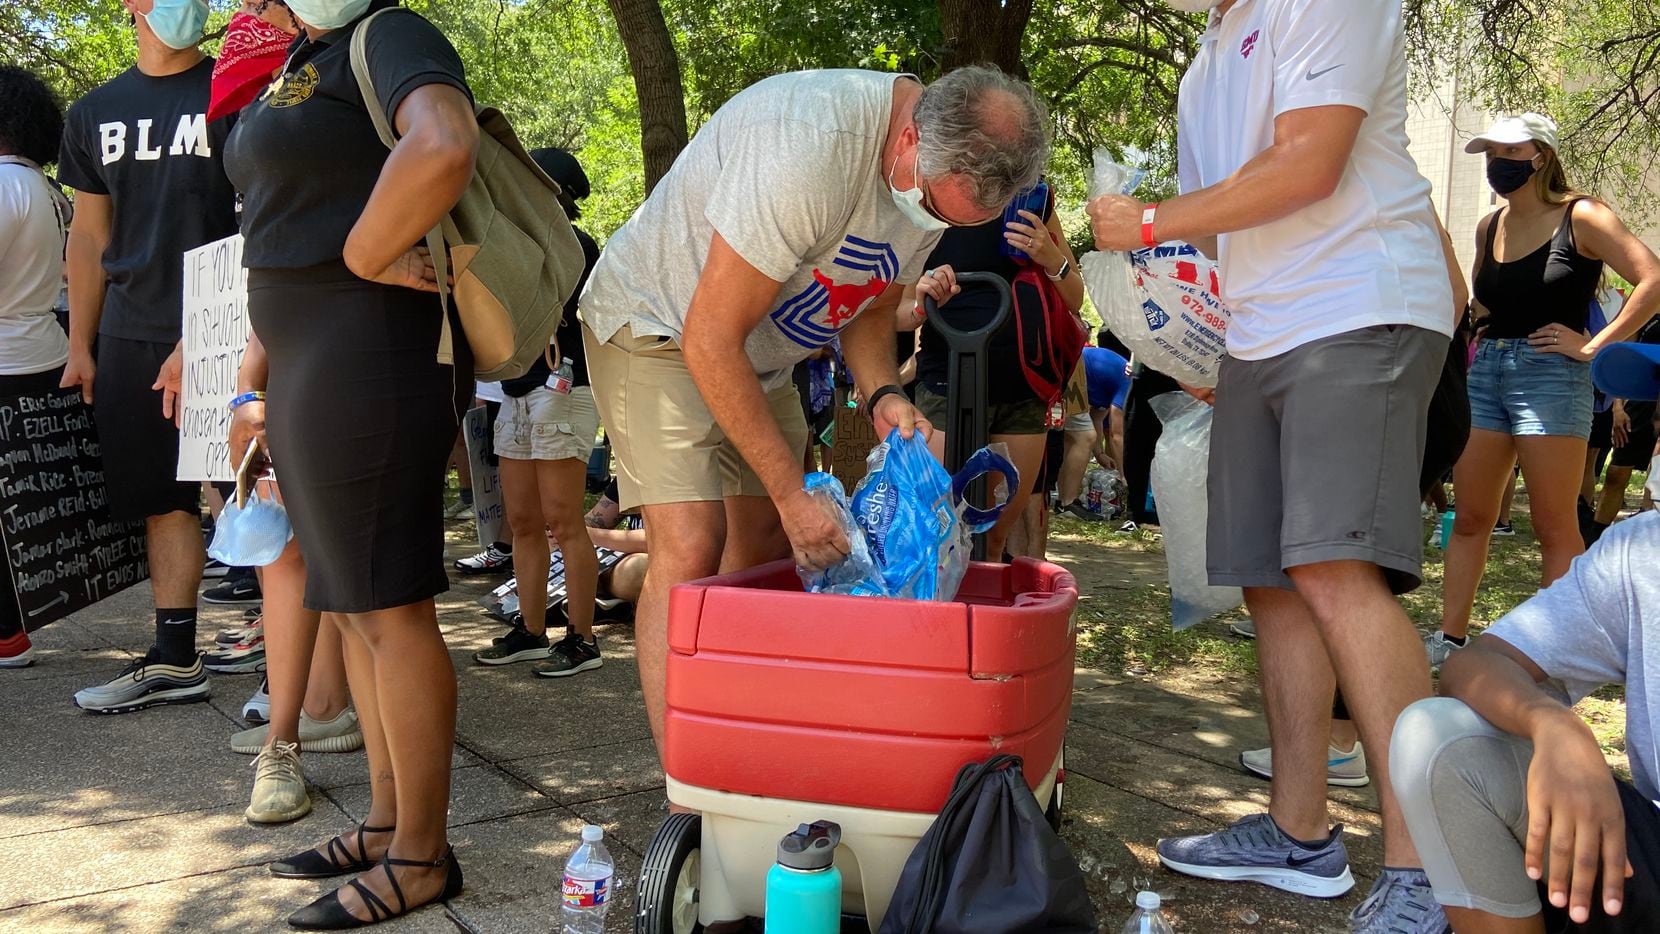 SMU football coach Sonny Dykes passes out water bottles while attending a protest at Dallas...